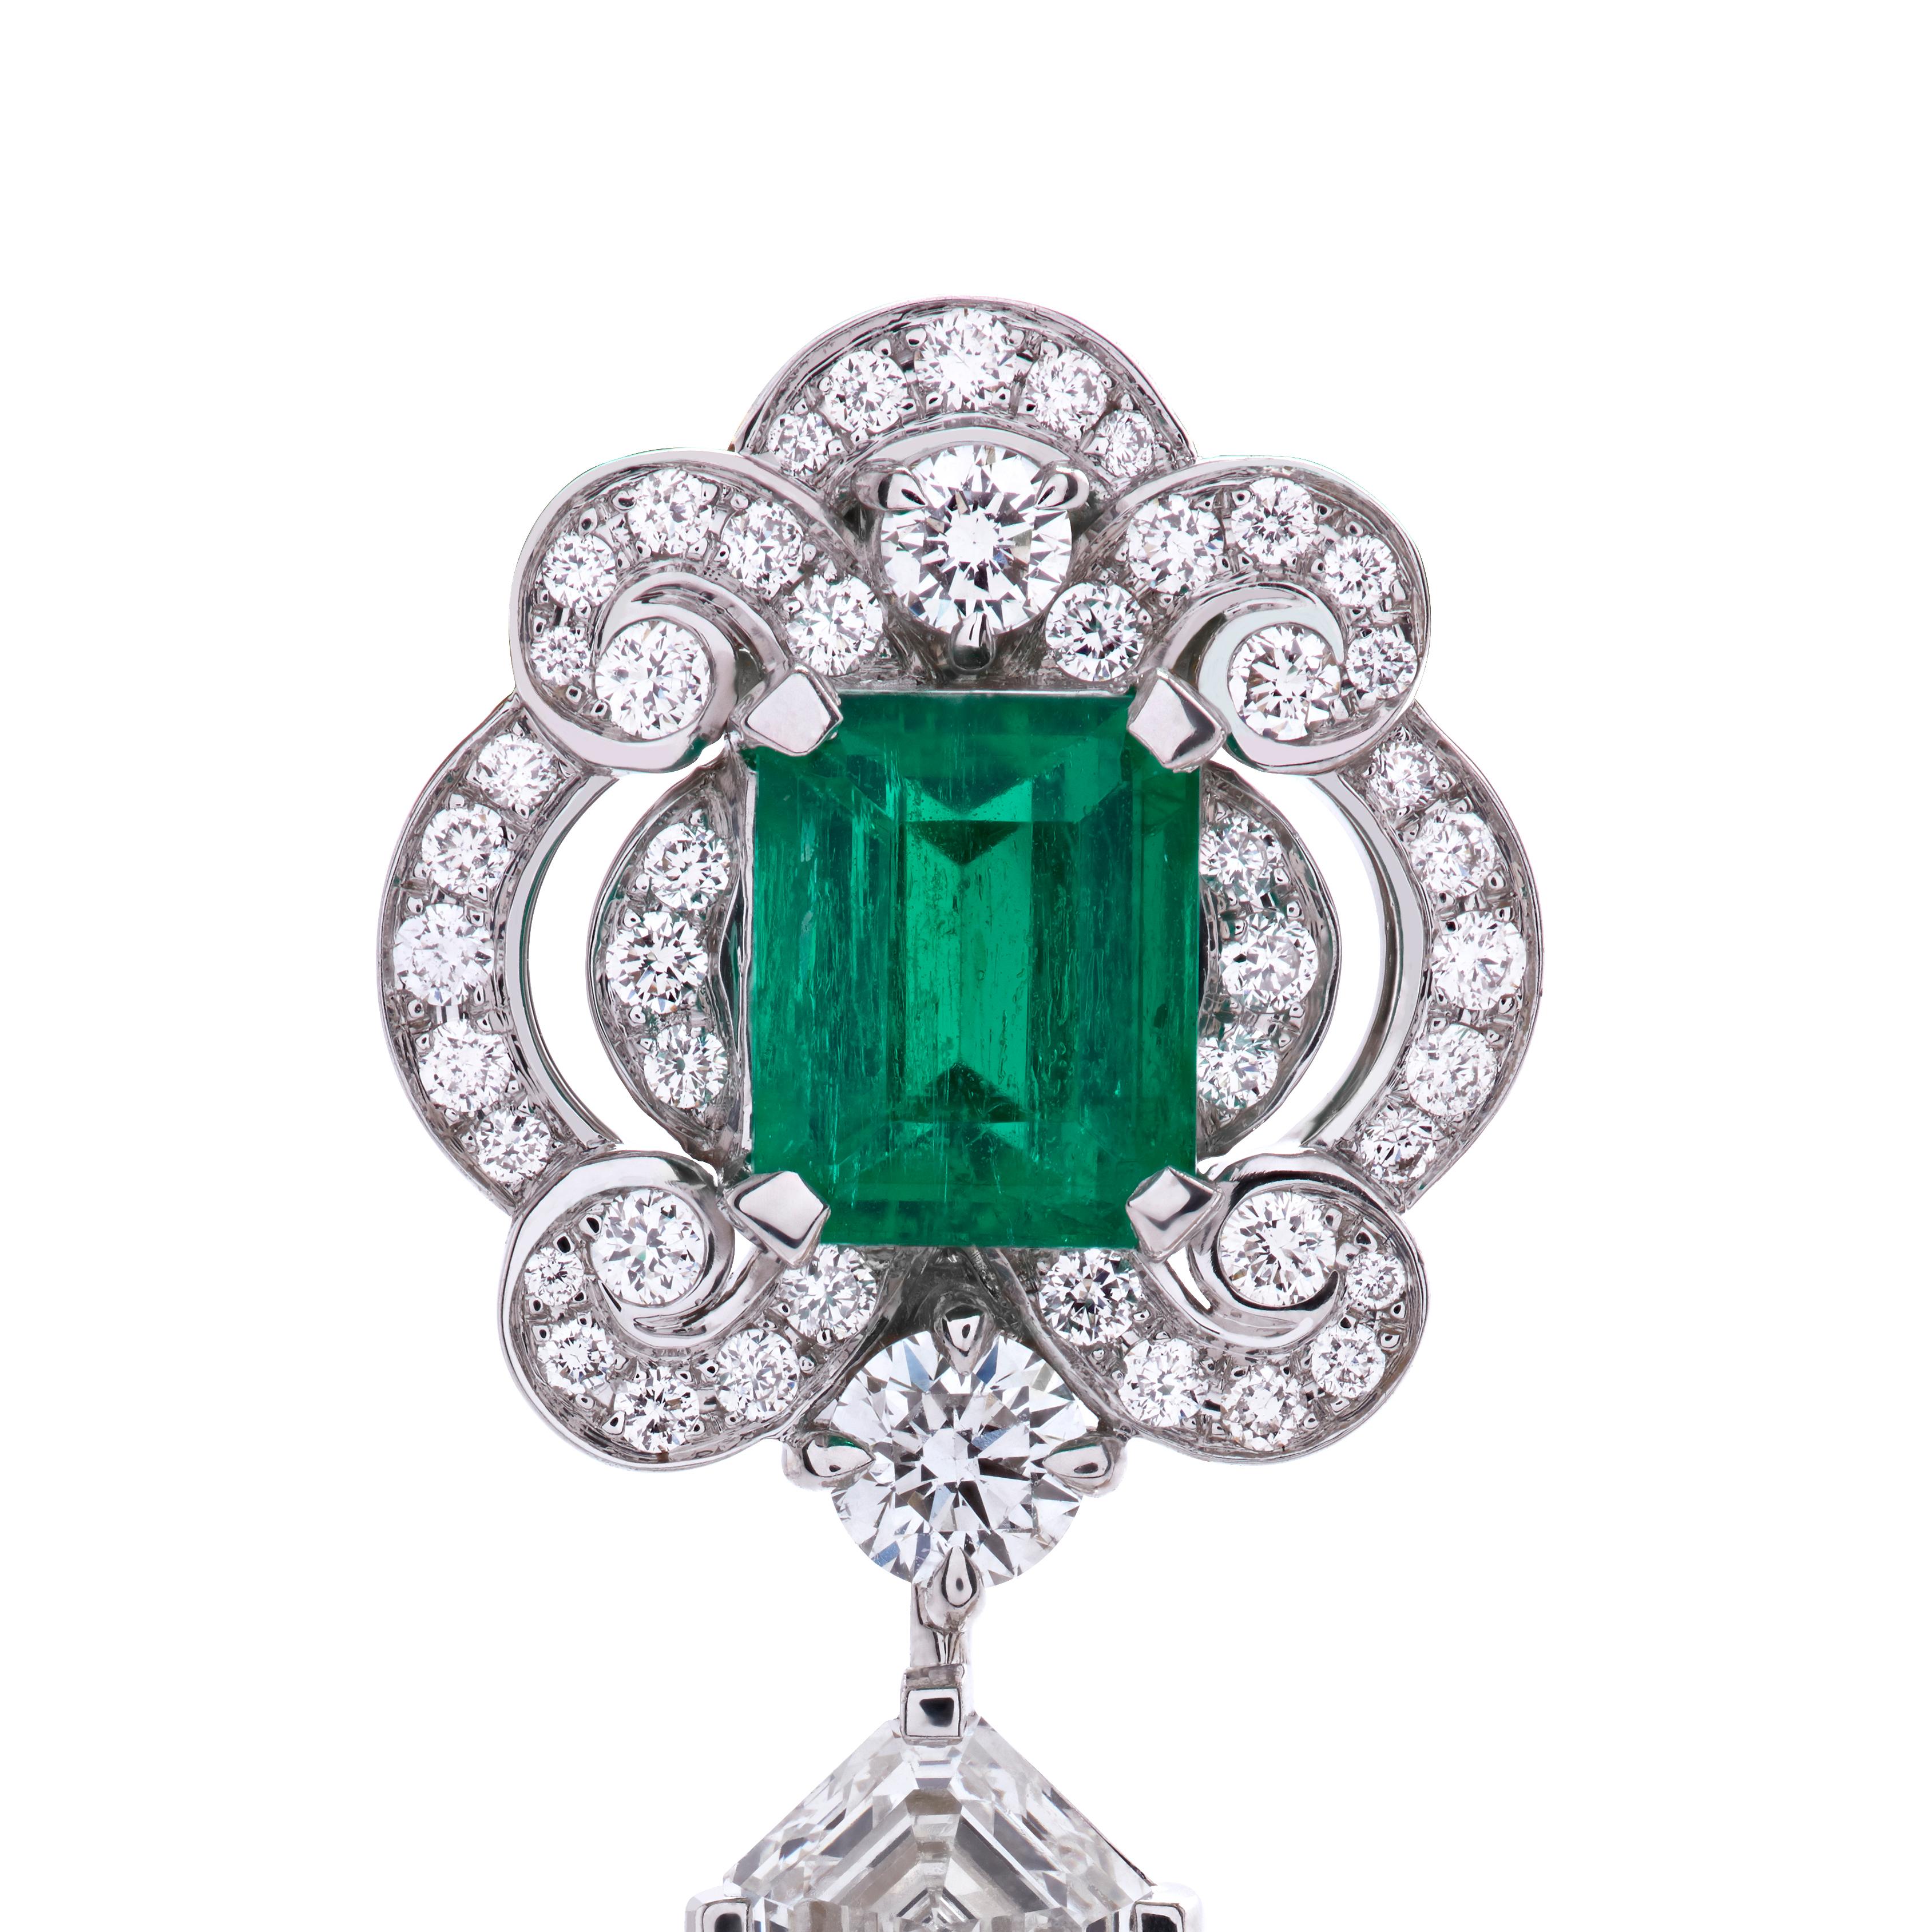 A pair of 18 karat white gold earrings from the House of Garrard. The earrings are set with central Gubelin certified emerald cut emeralds weighing 1.61 carat and 1.67 carat, GRS certified pearshape emeralds weighing 1.42 carat and 1.51 carat and 46